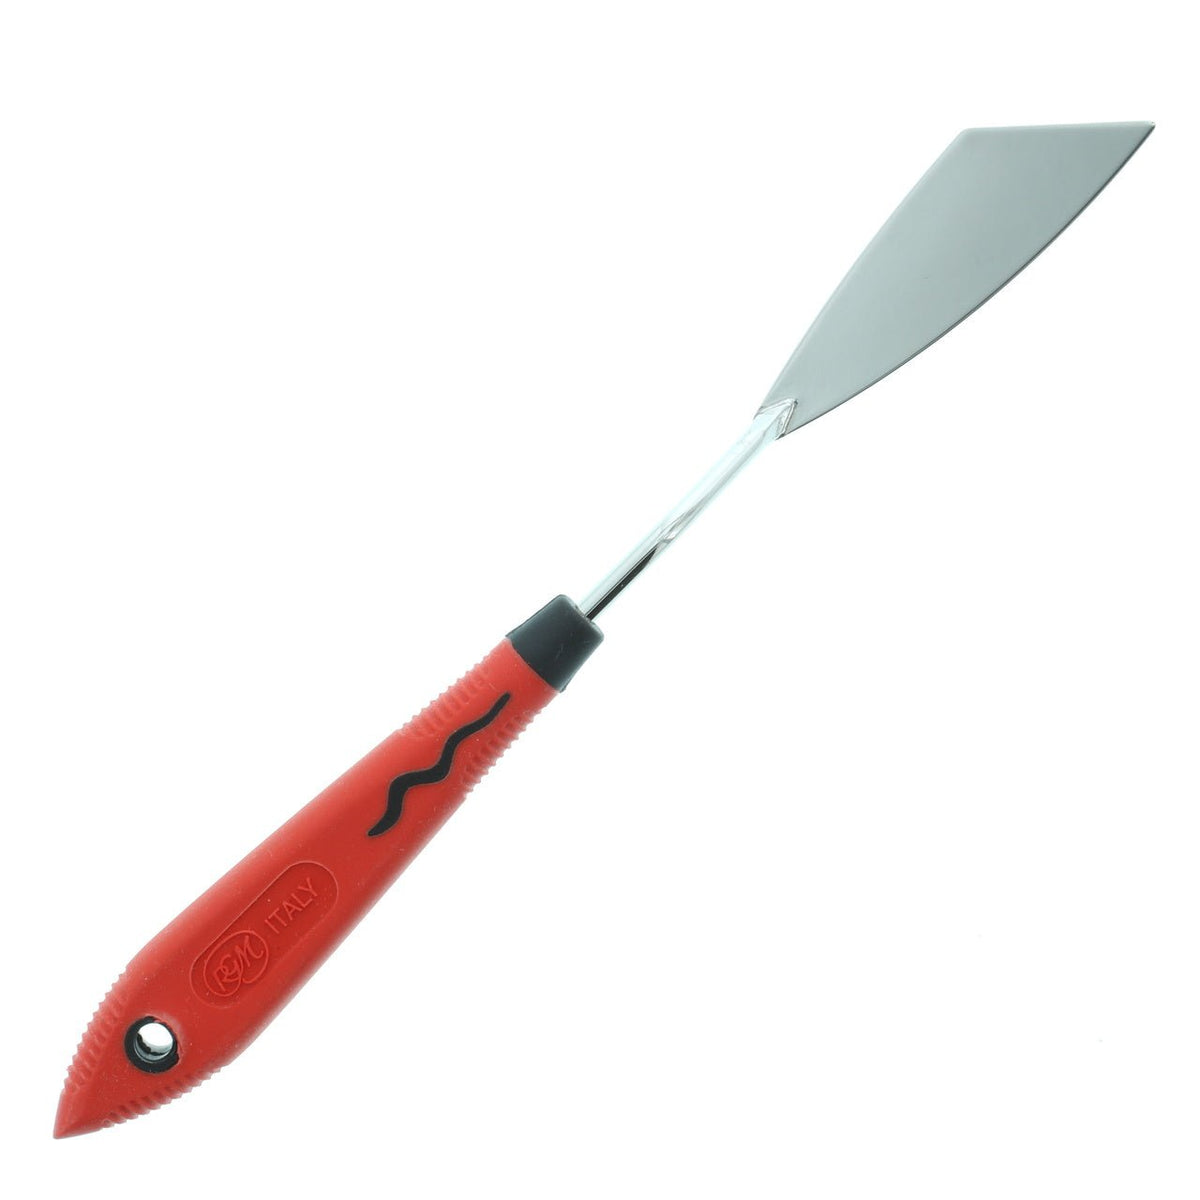 RGM Soft Grip Painting Knife #062 (Red Handle) - merriartist.com